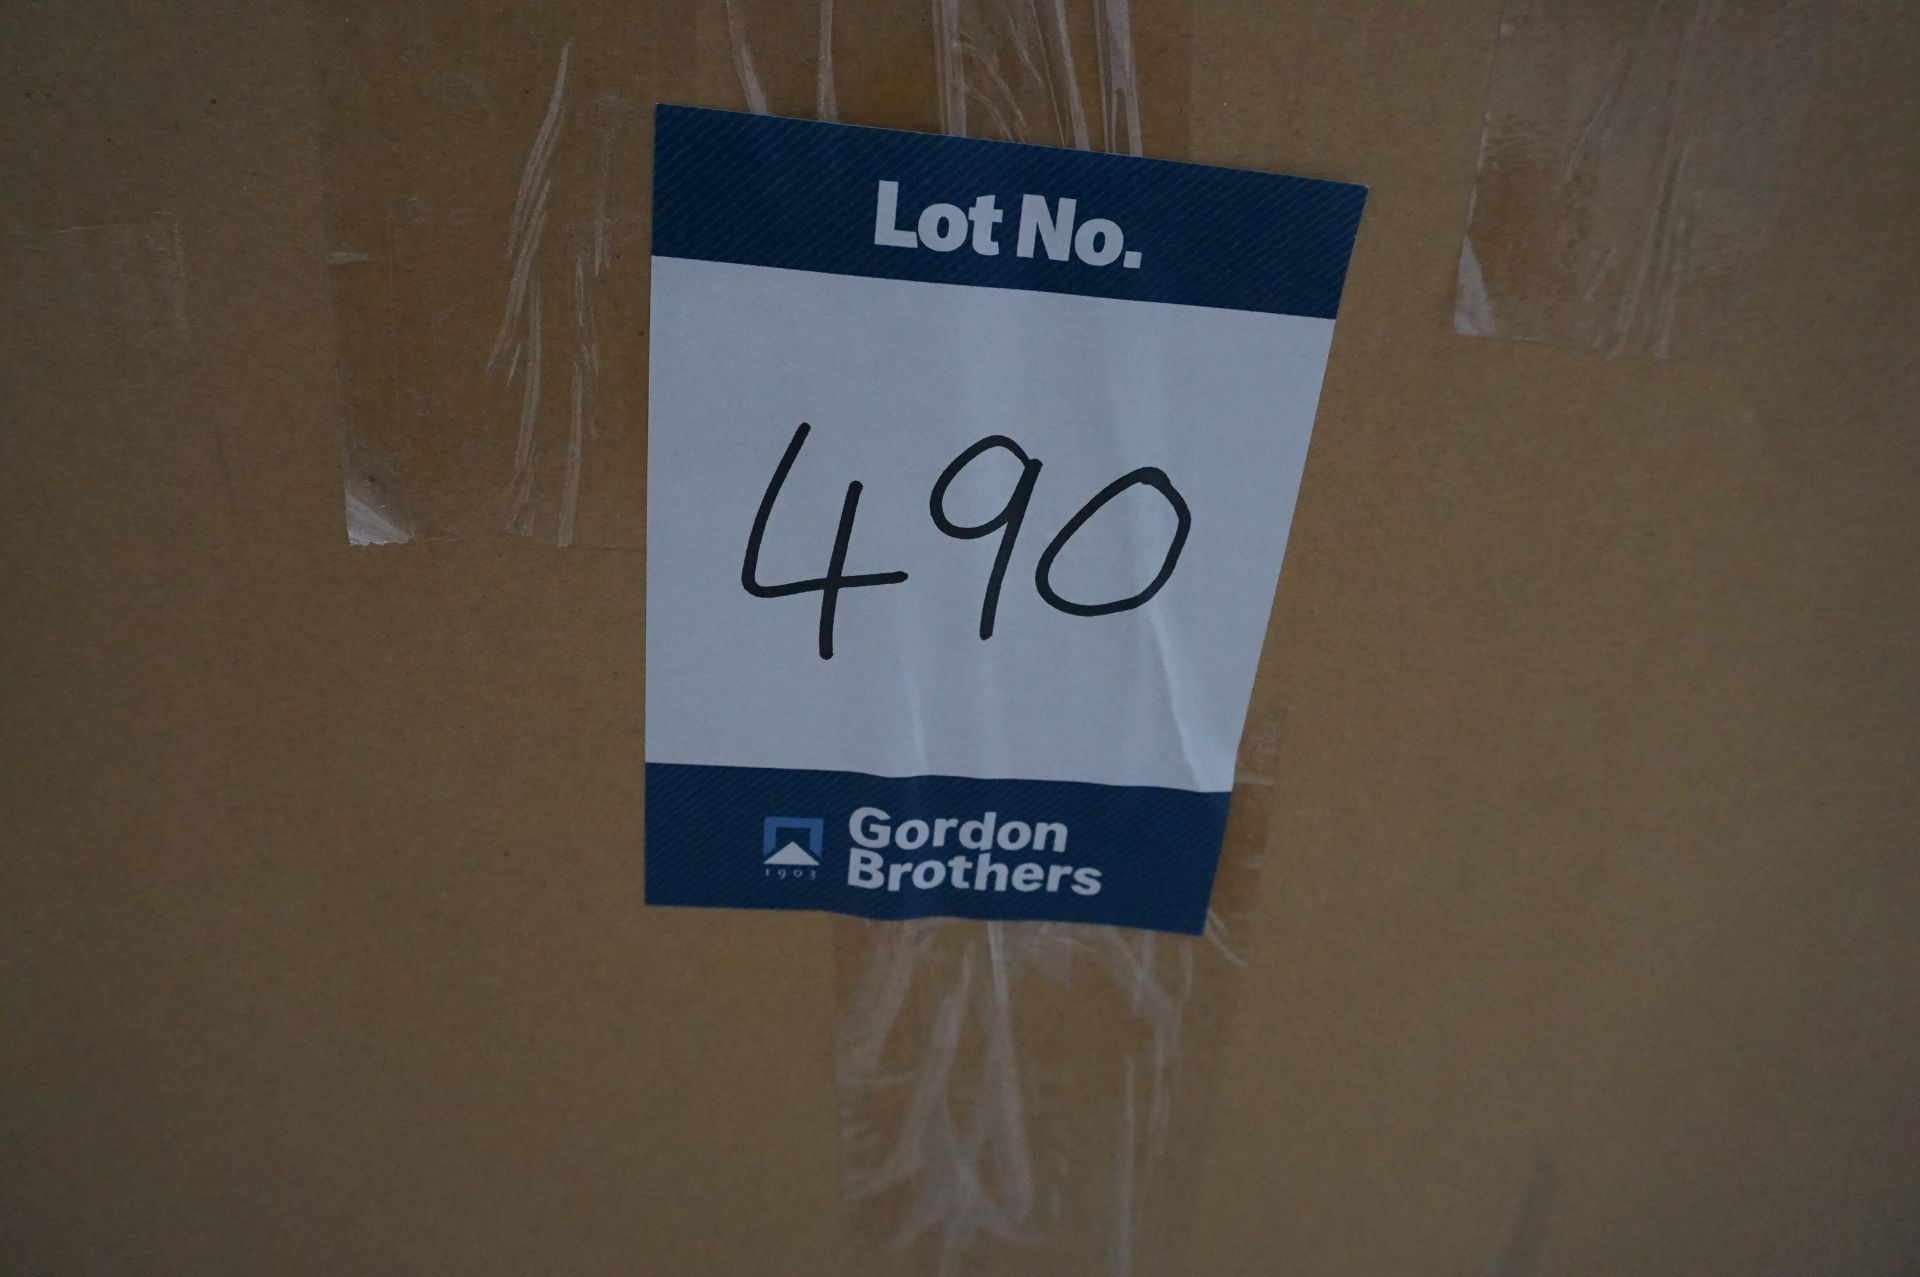 1x (no.) pallet box of Rothoblaas screws VGS 9 x 320mm qty 3200 self tapping wood screws - Image 3 of 3